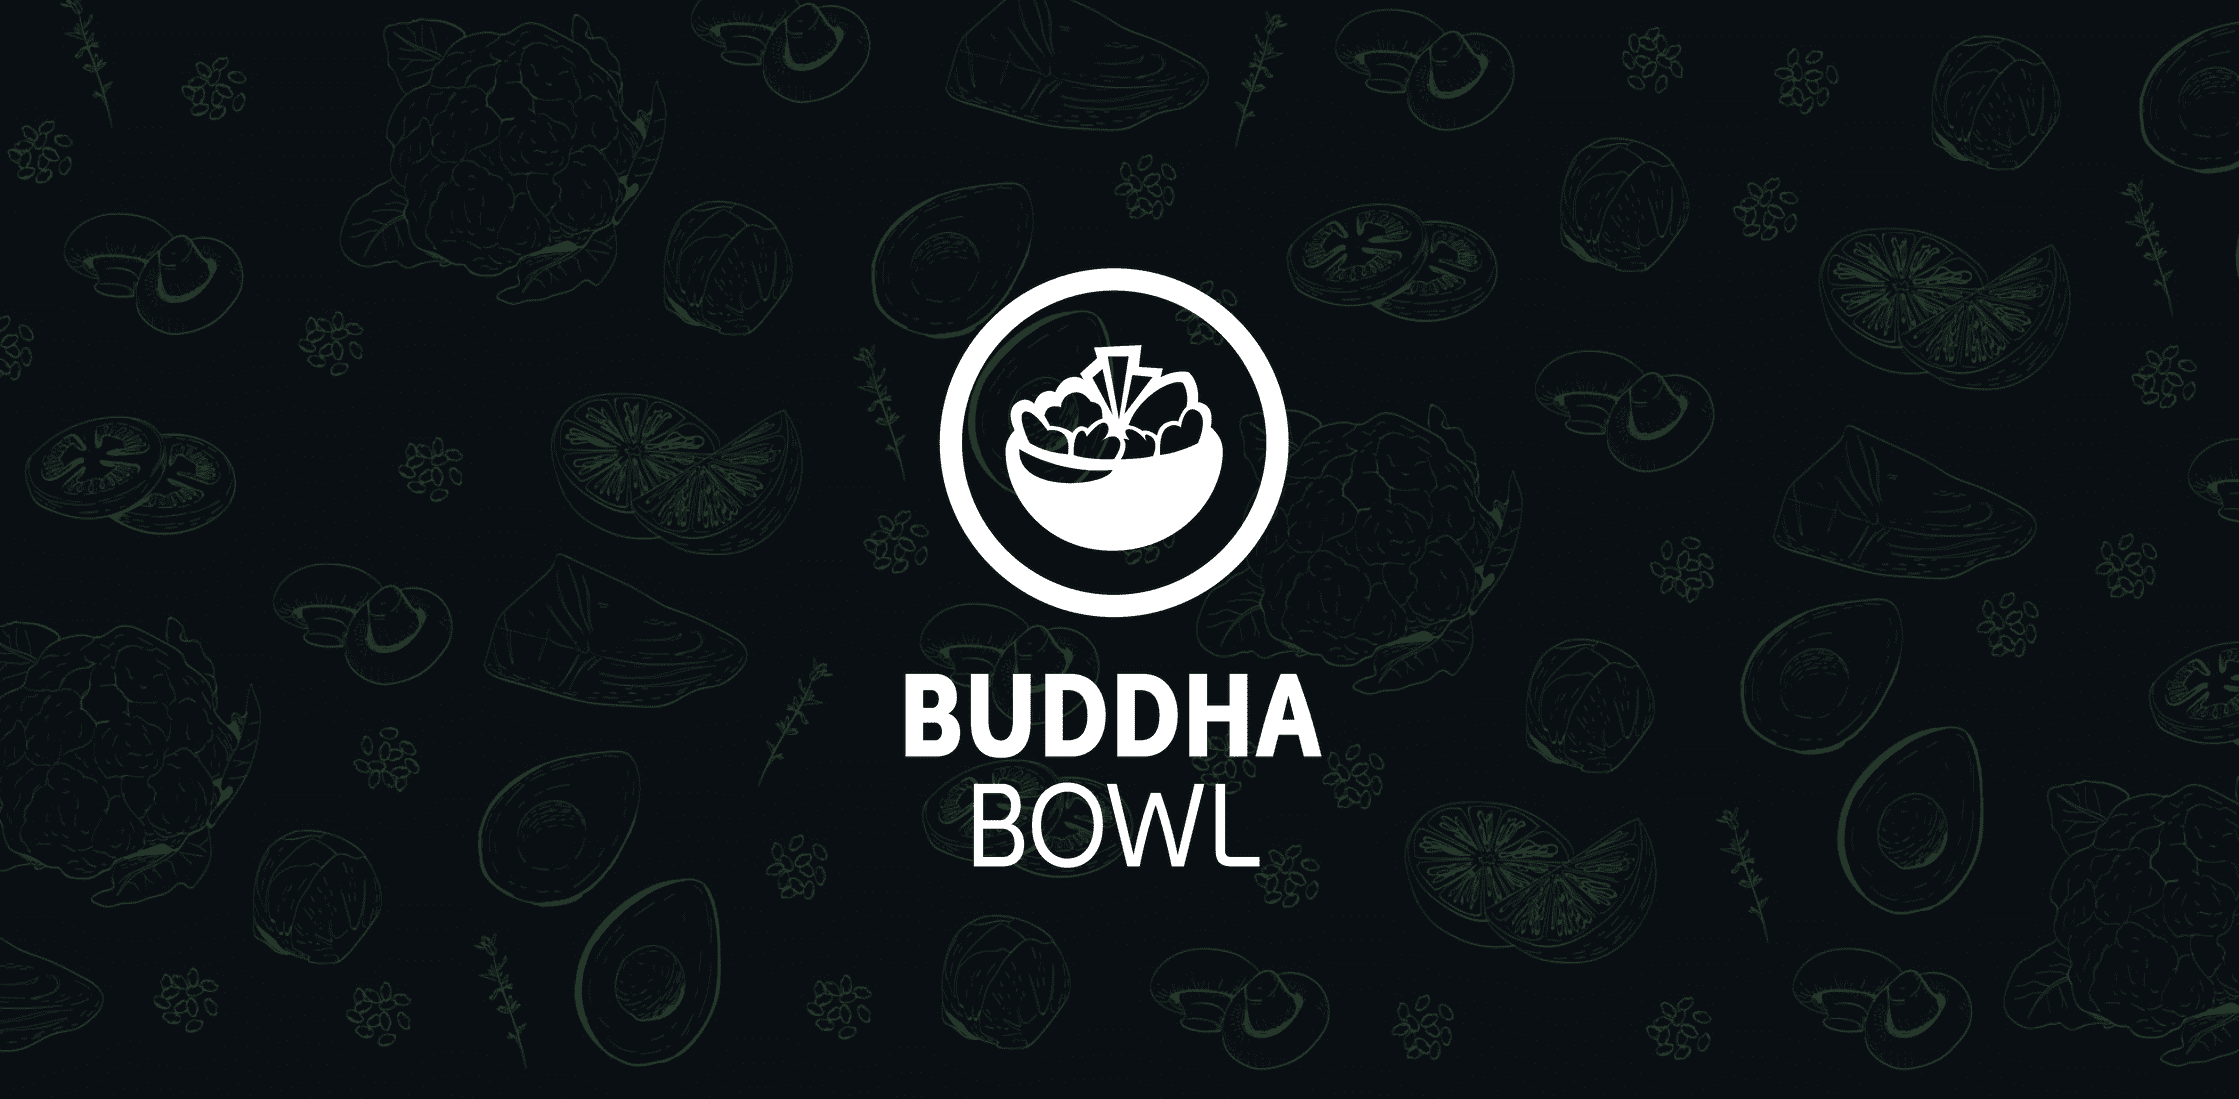 White Buddha Bowl logo with black illustration wall with green drawings of meat, fruits and vegetables